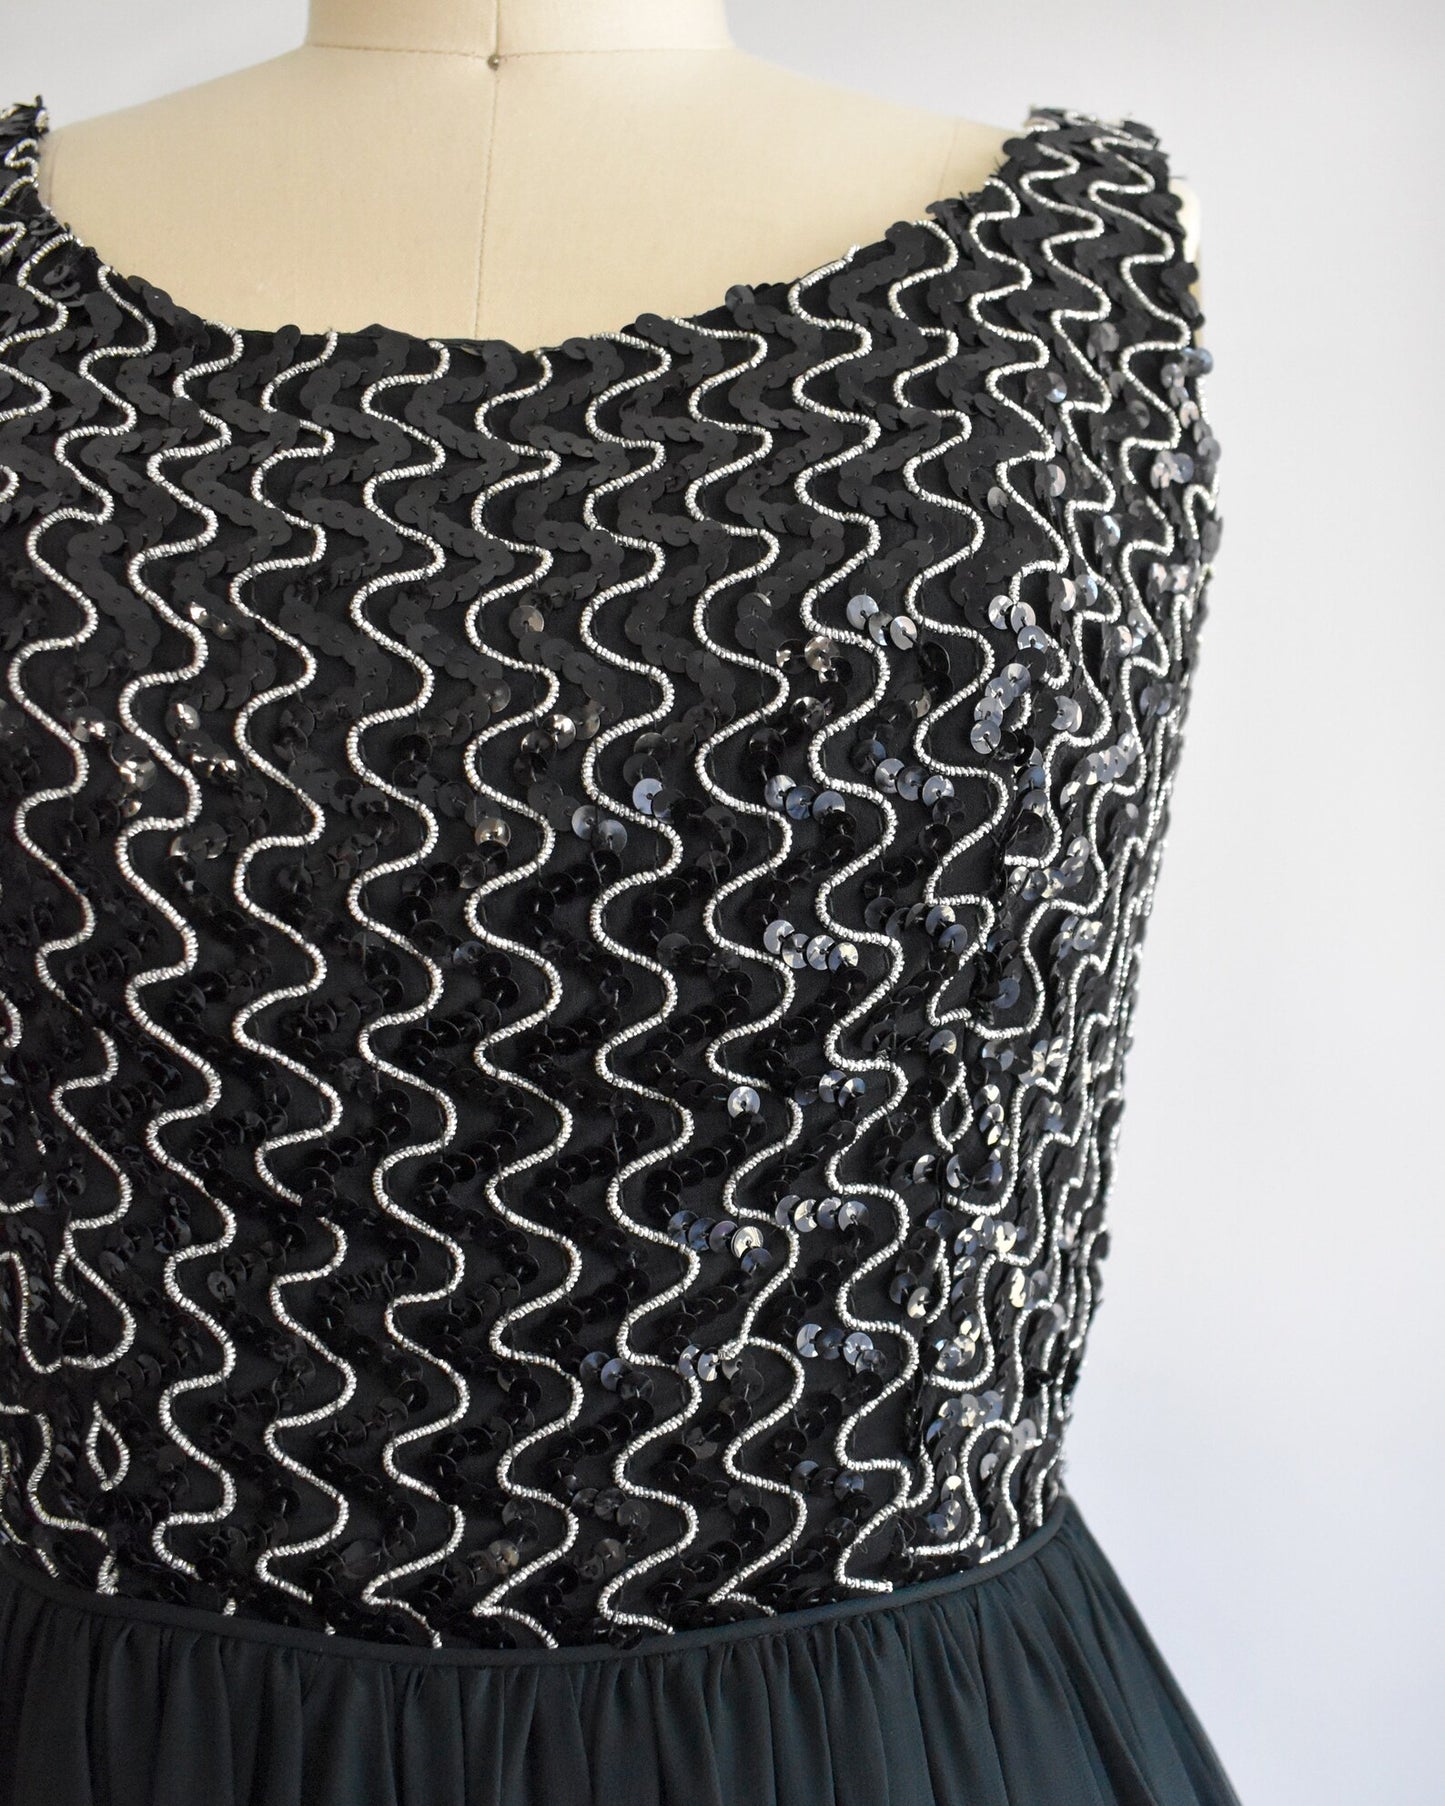 Close up of a  vintage 60s dress with a black sequin bodice with silver vertical squiggles. The skirt is a layered with black chiffon on top. The dress is modeled on a dress form.